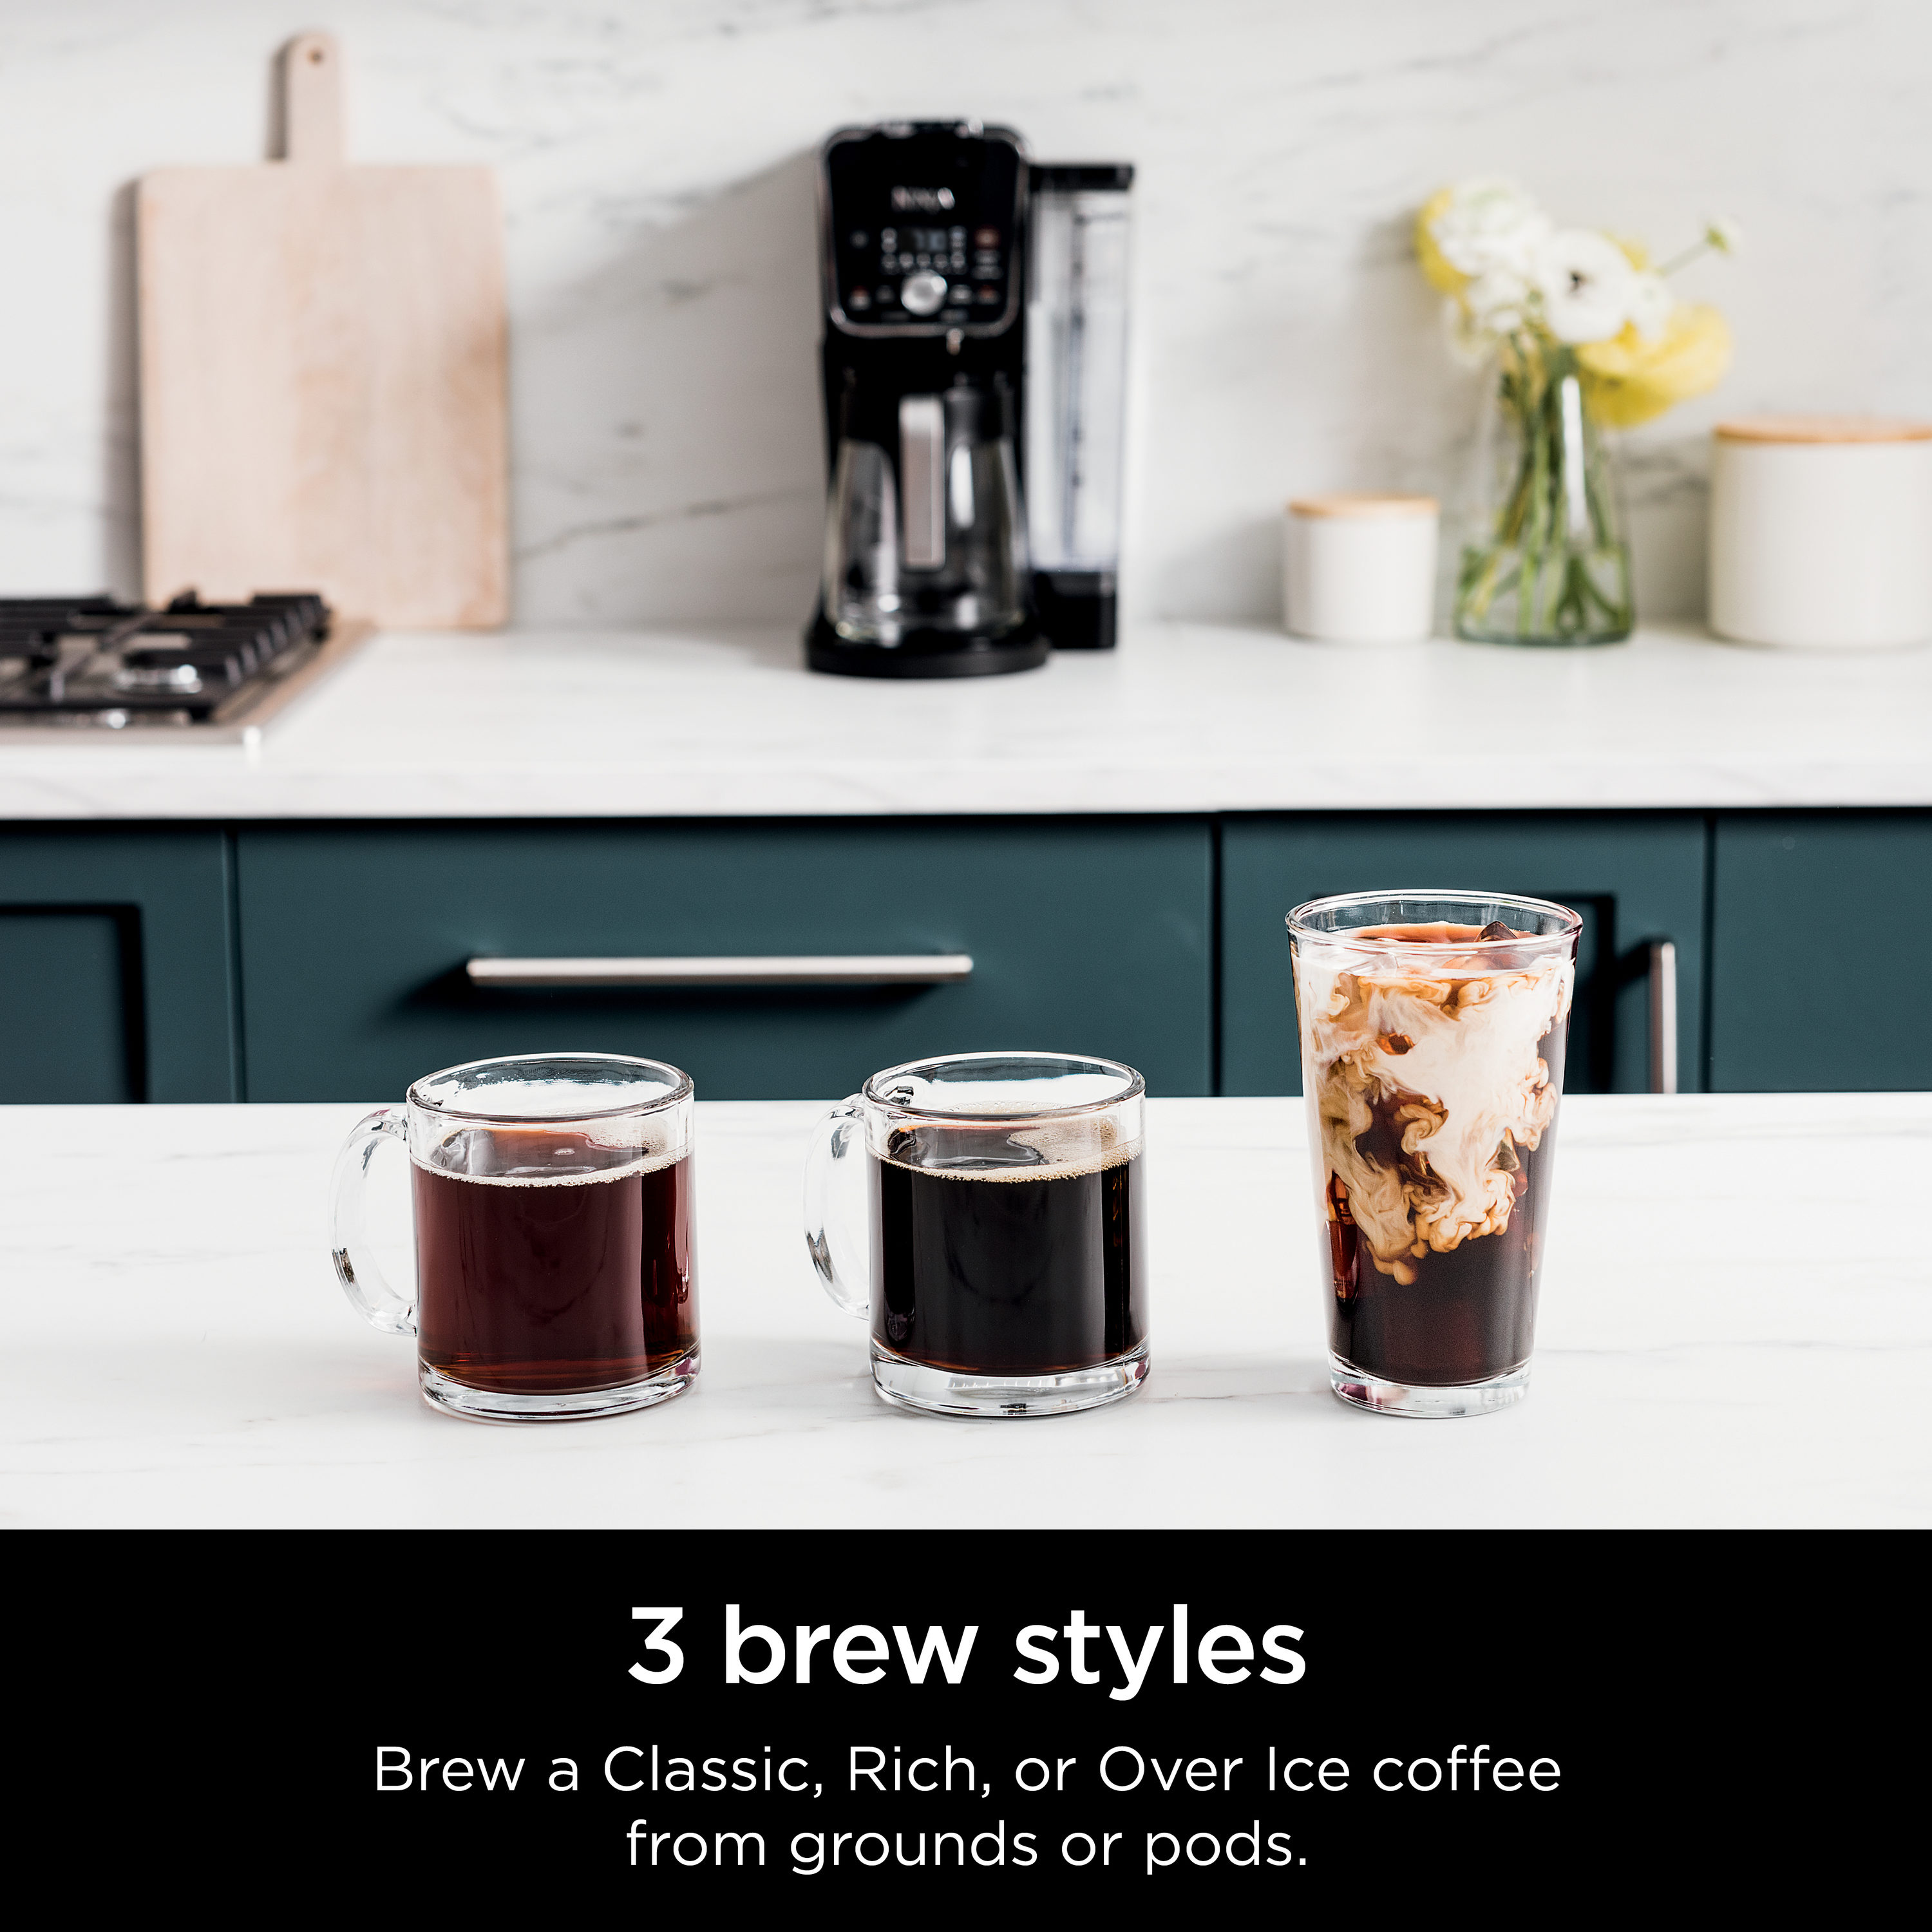 Ninja 12-Cup Black Residential Cold Brew Coffee Maker in the Coffee Makers  department at